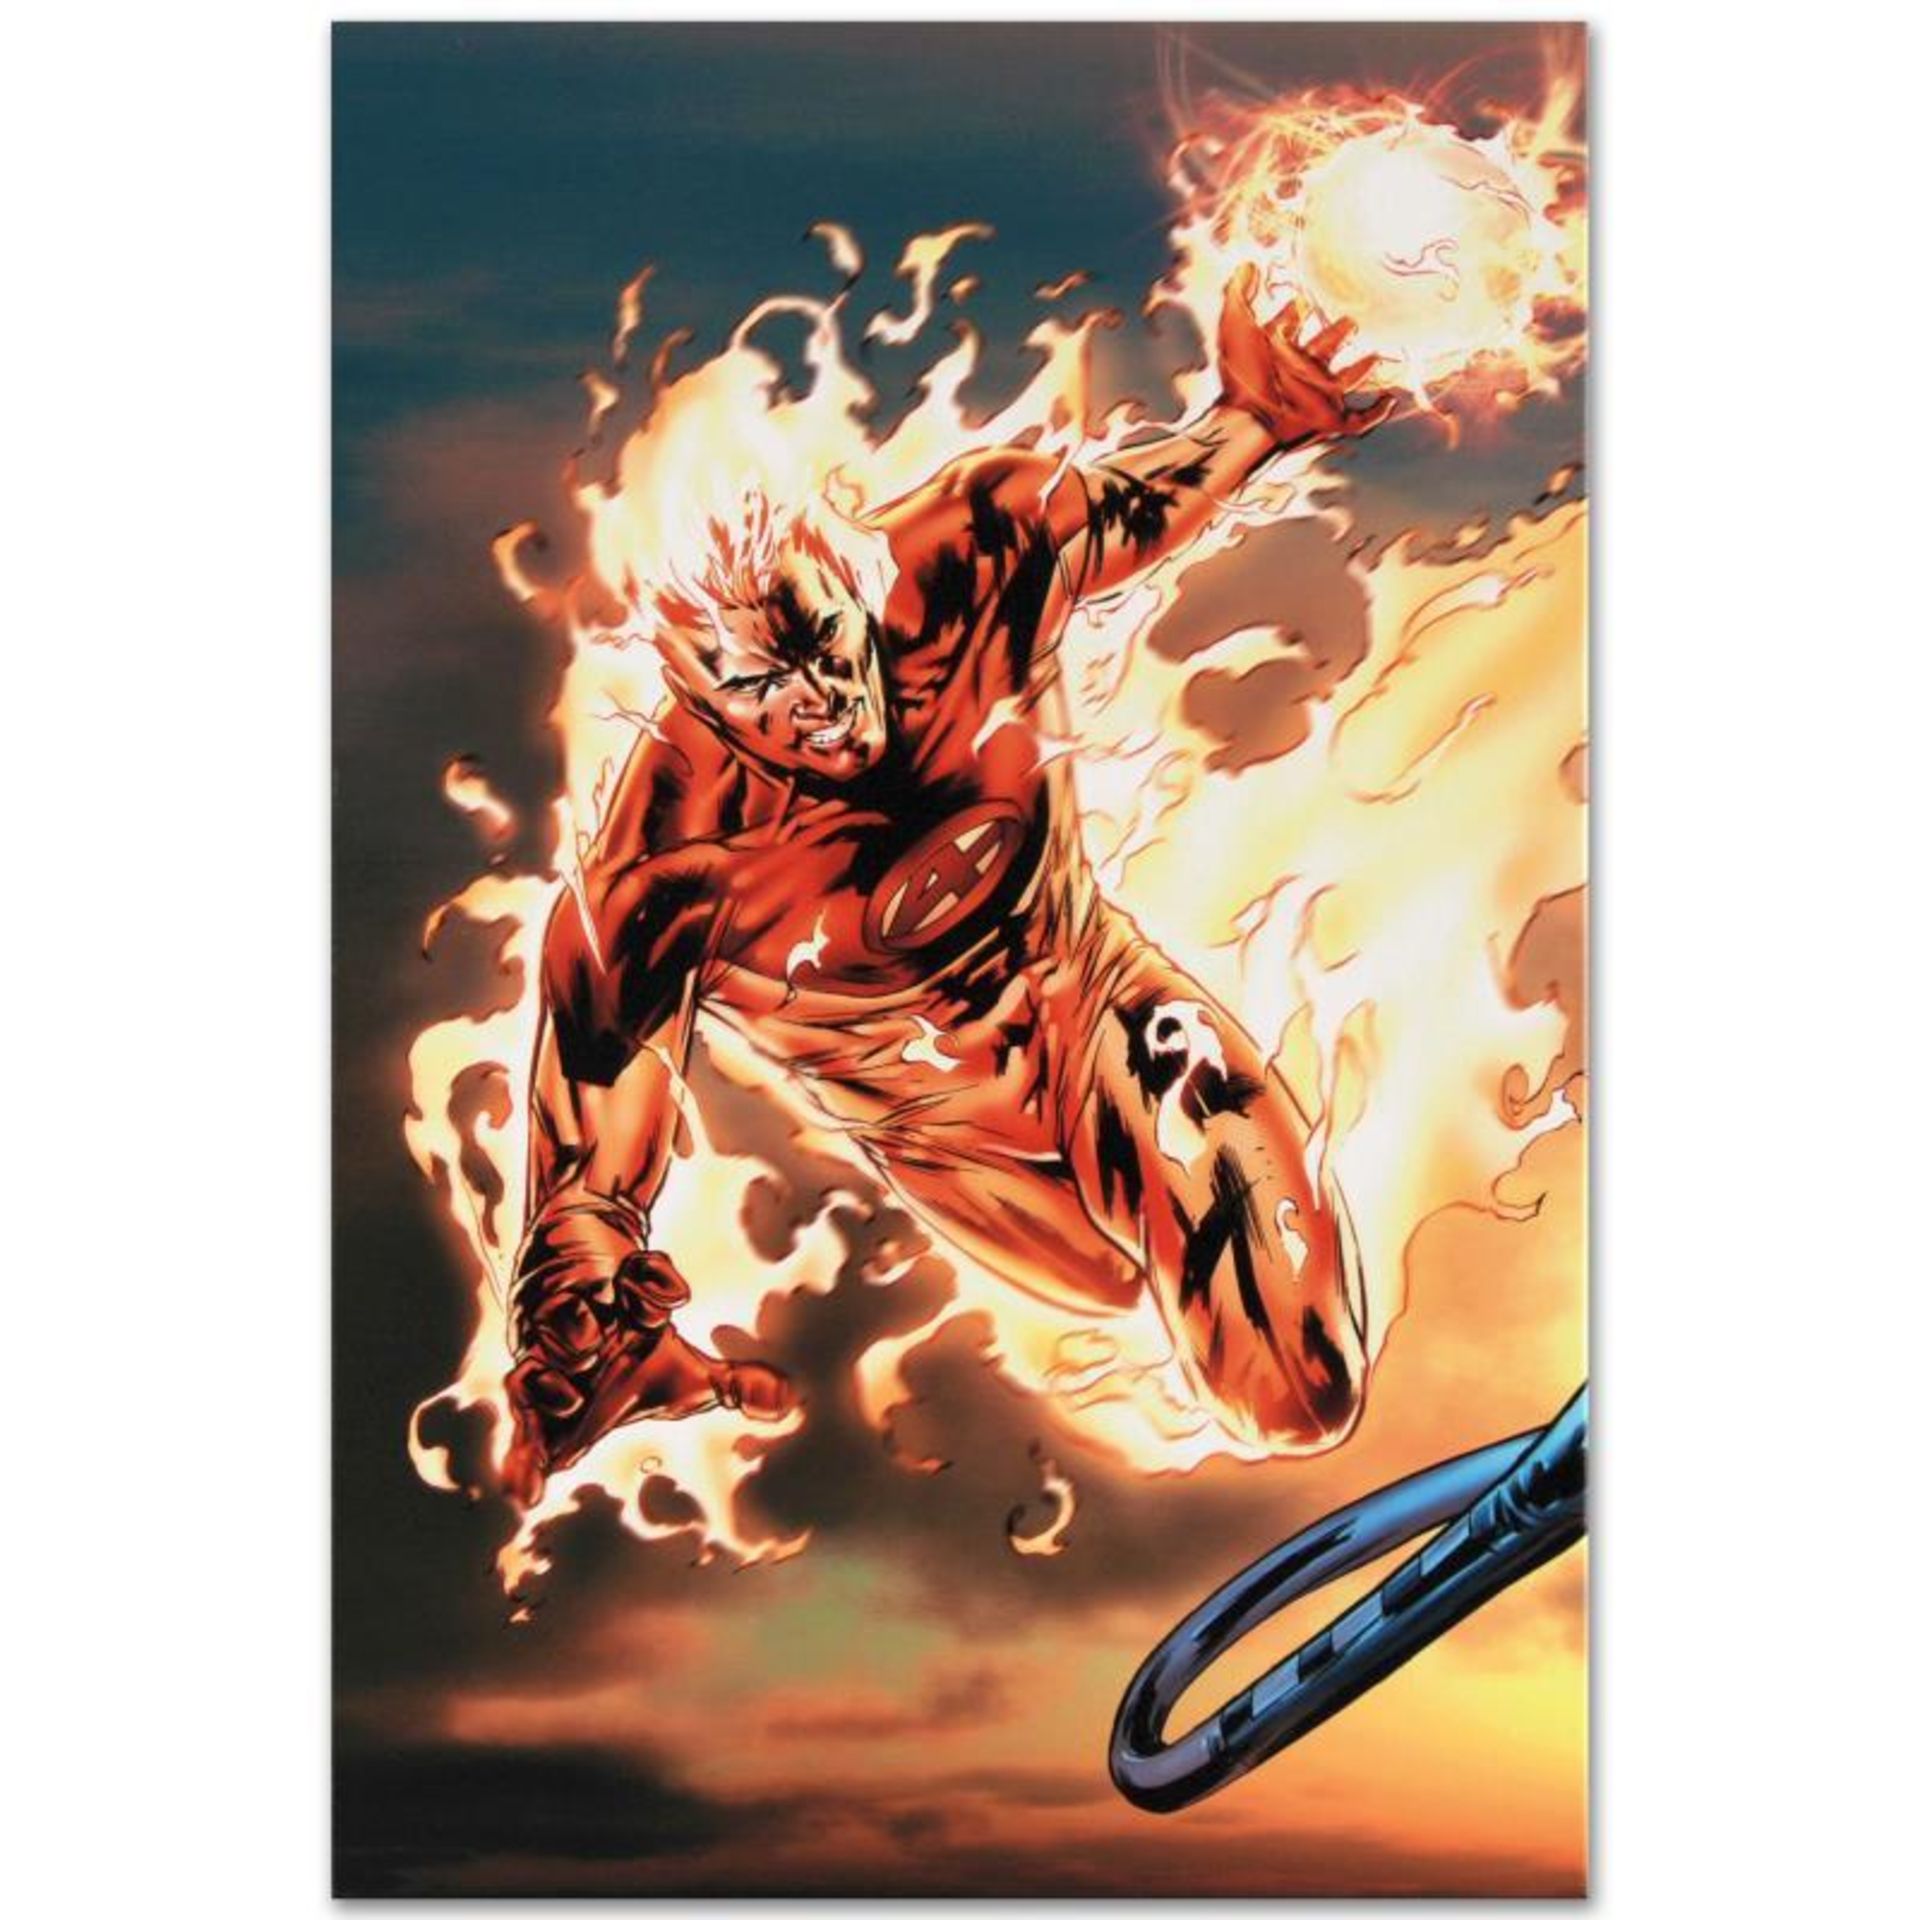 Marvel Comics "Ultimate Fantastic Four #54" Numbered Limited Edition Giclee on C